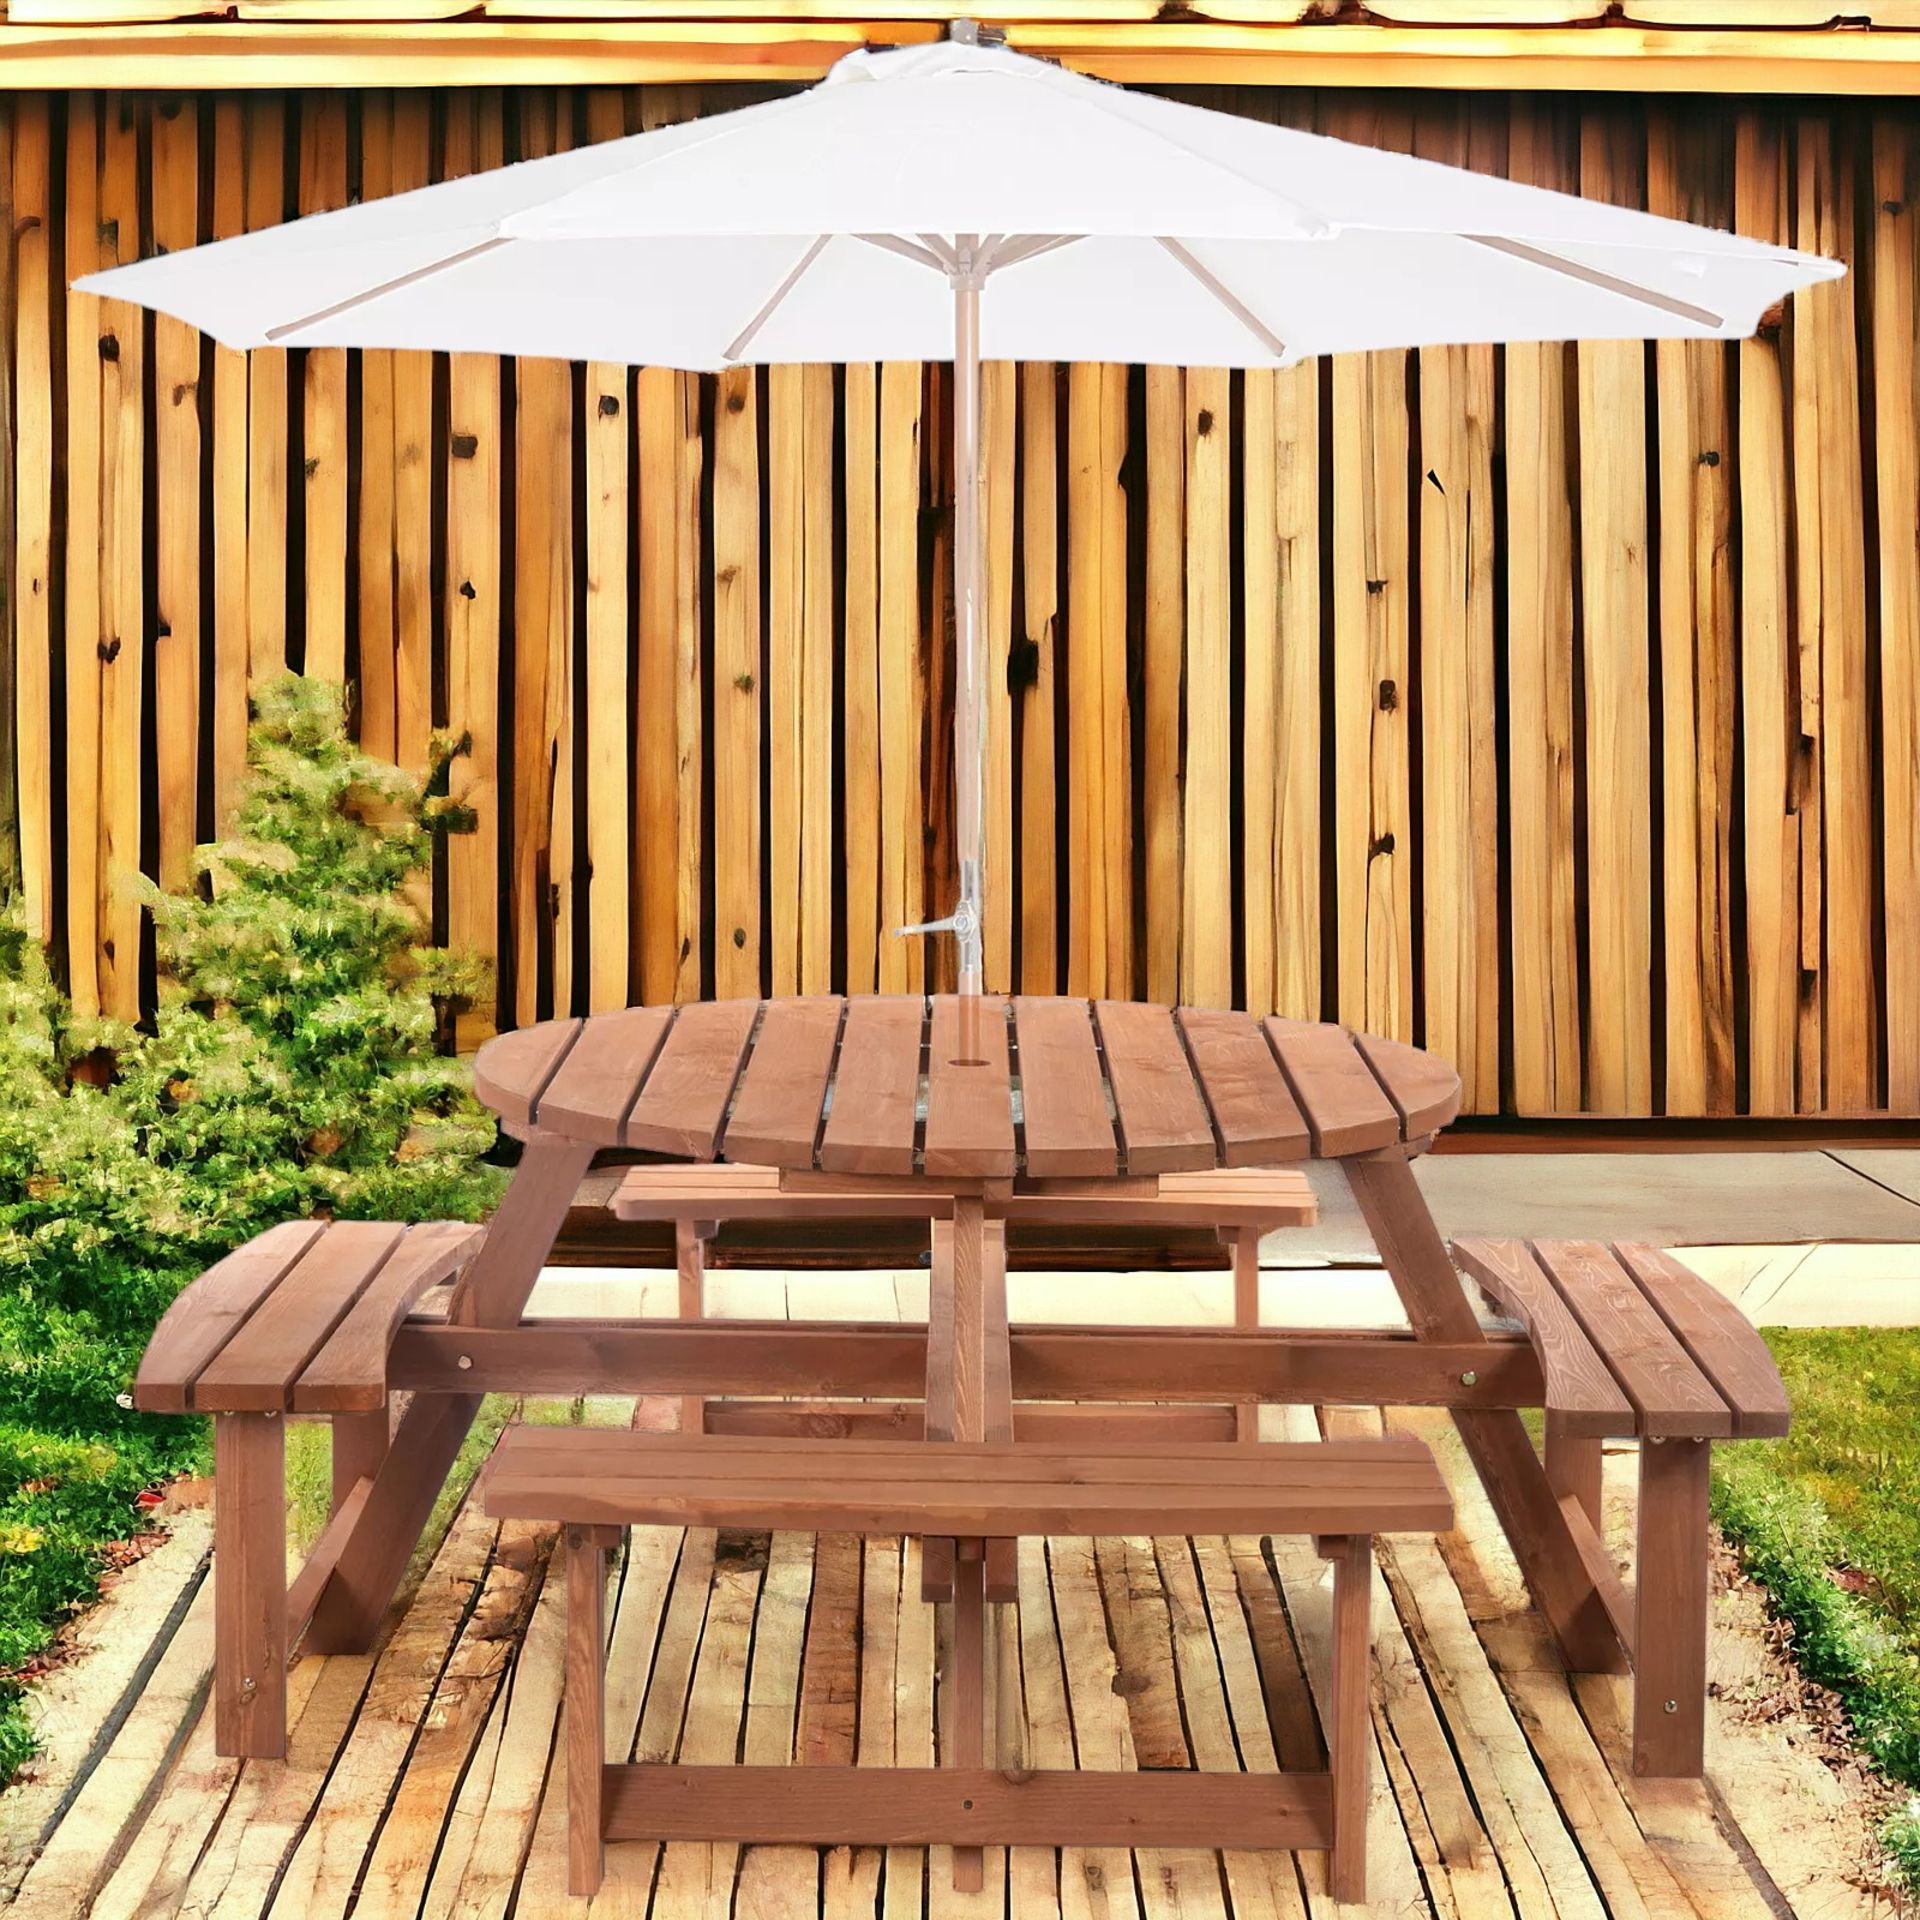 FREE DELIVERY - BRAND NEW 8 SEAT GARDEN OUTDOOR WOODEN ROUND PICNIC TABLE BENCH - Image 2 of 2